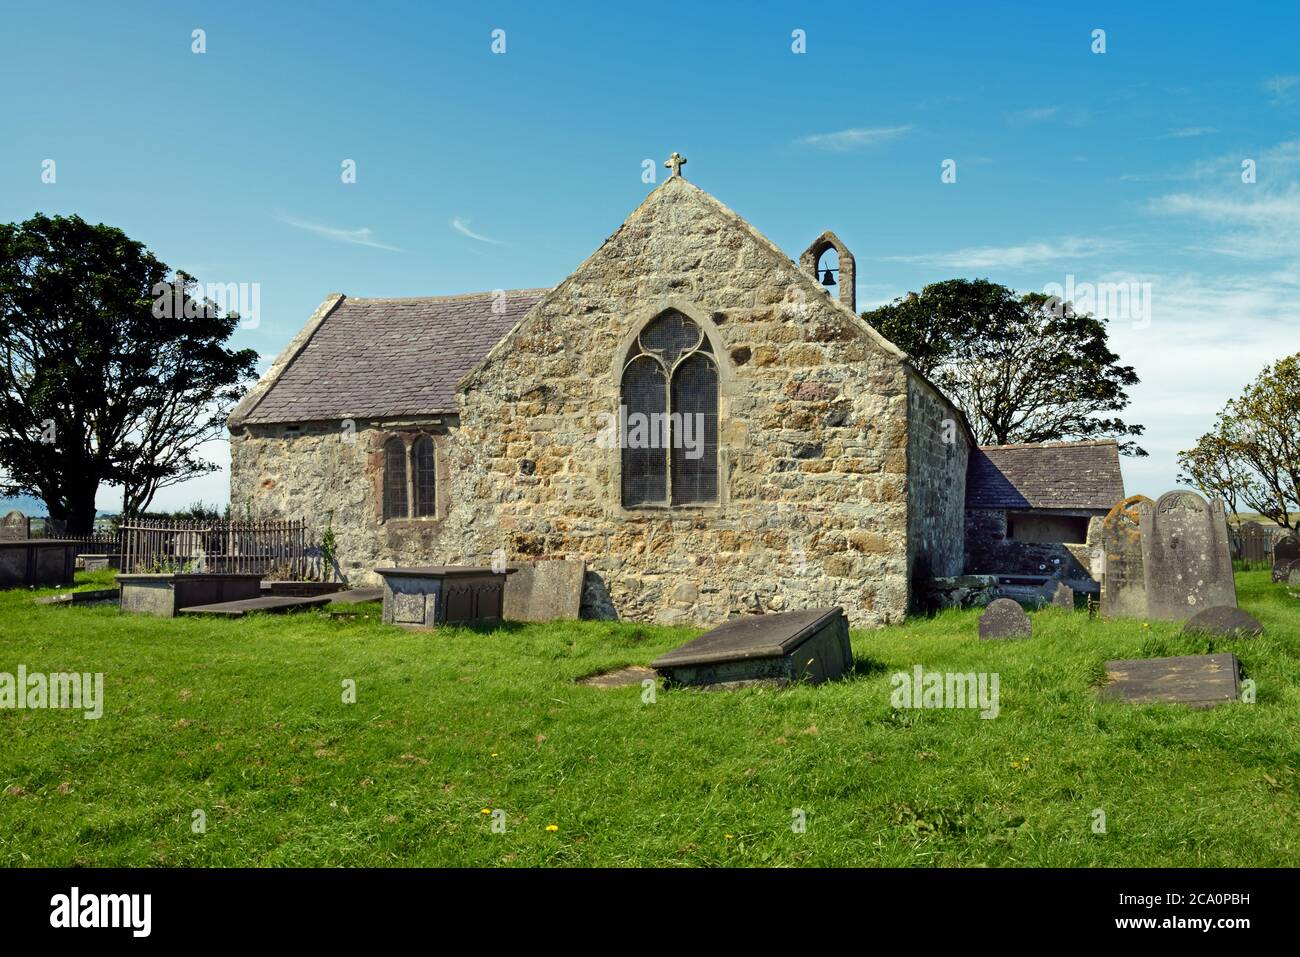 St Baglan's Church, Llanfaglan, North Wales, is the last resting place of Lord Snowdon. This medieval church dates back to the 13th century. Stock Photo